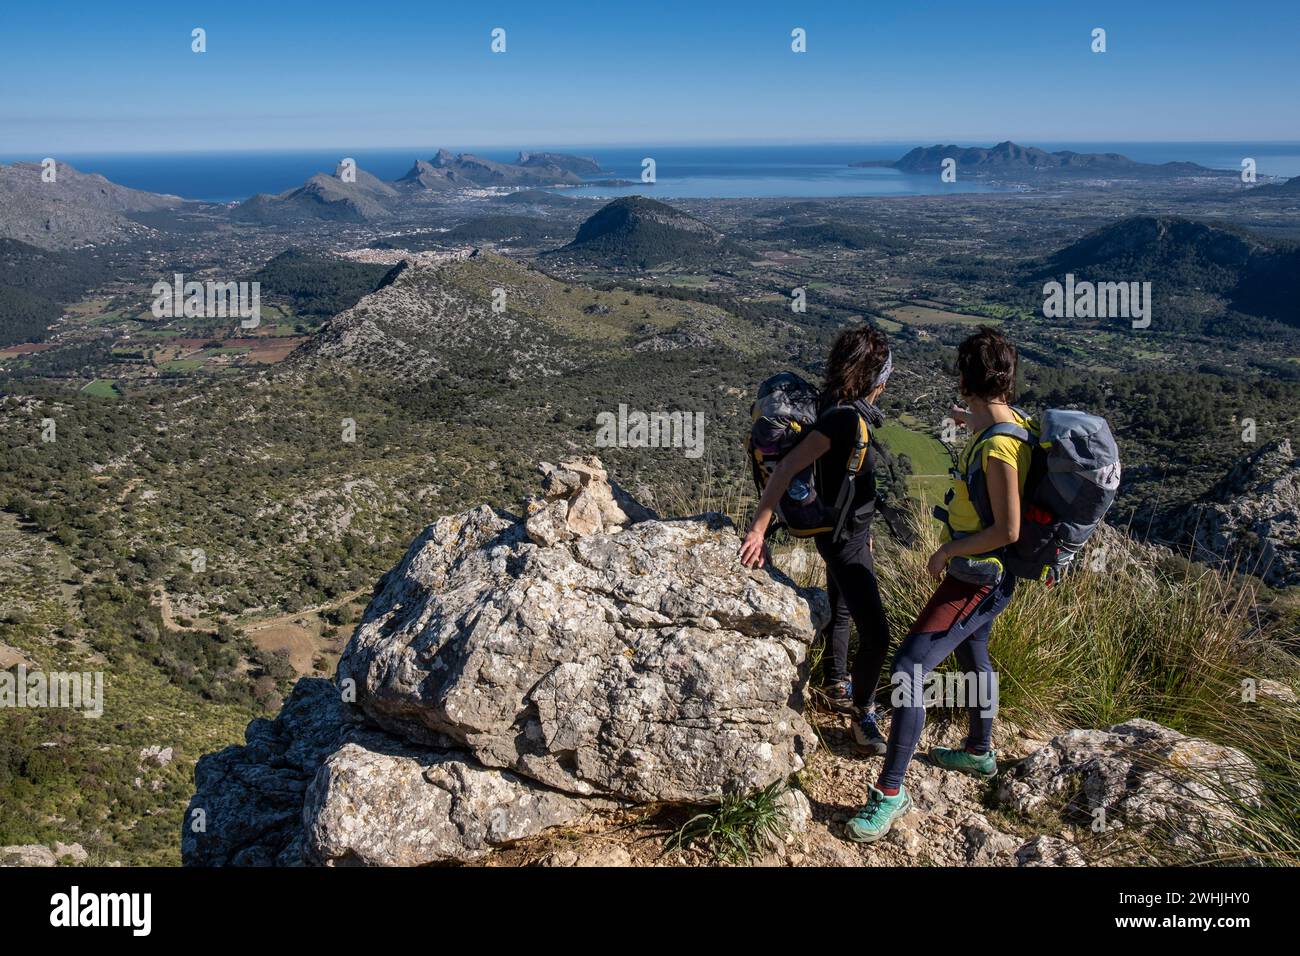 Hikers ascending Cucuia de Fartaritx with Alcudia bay in the background Stock Photo